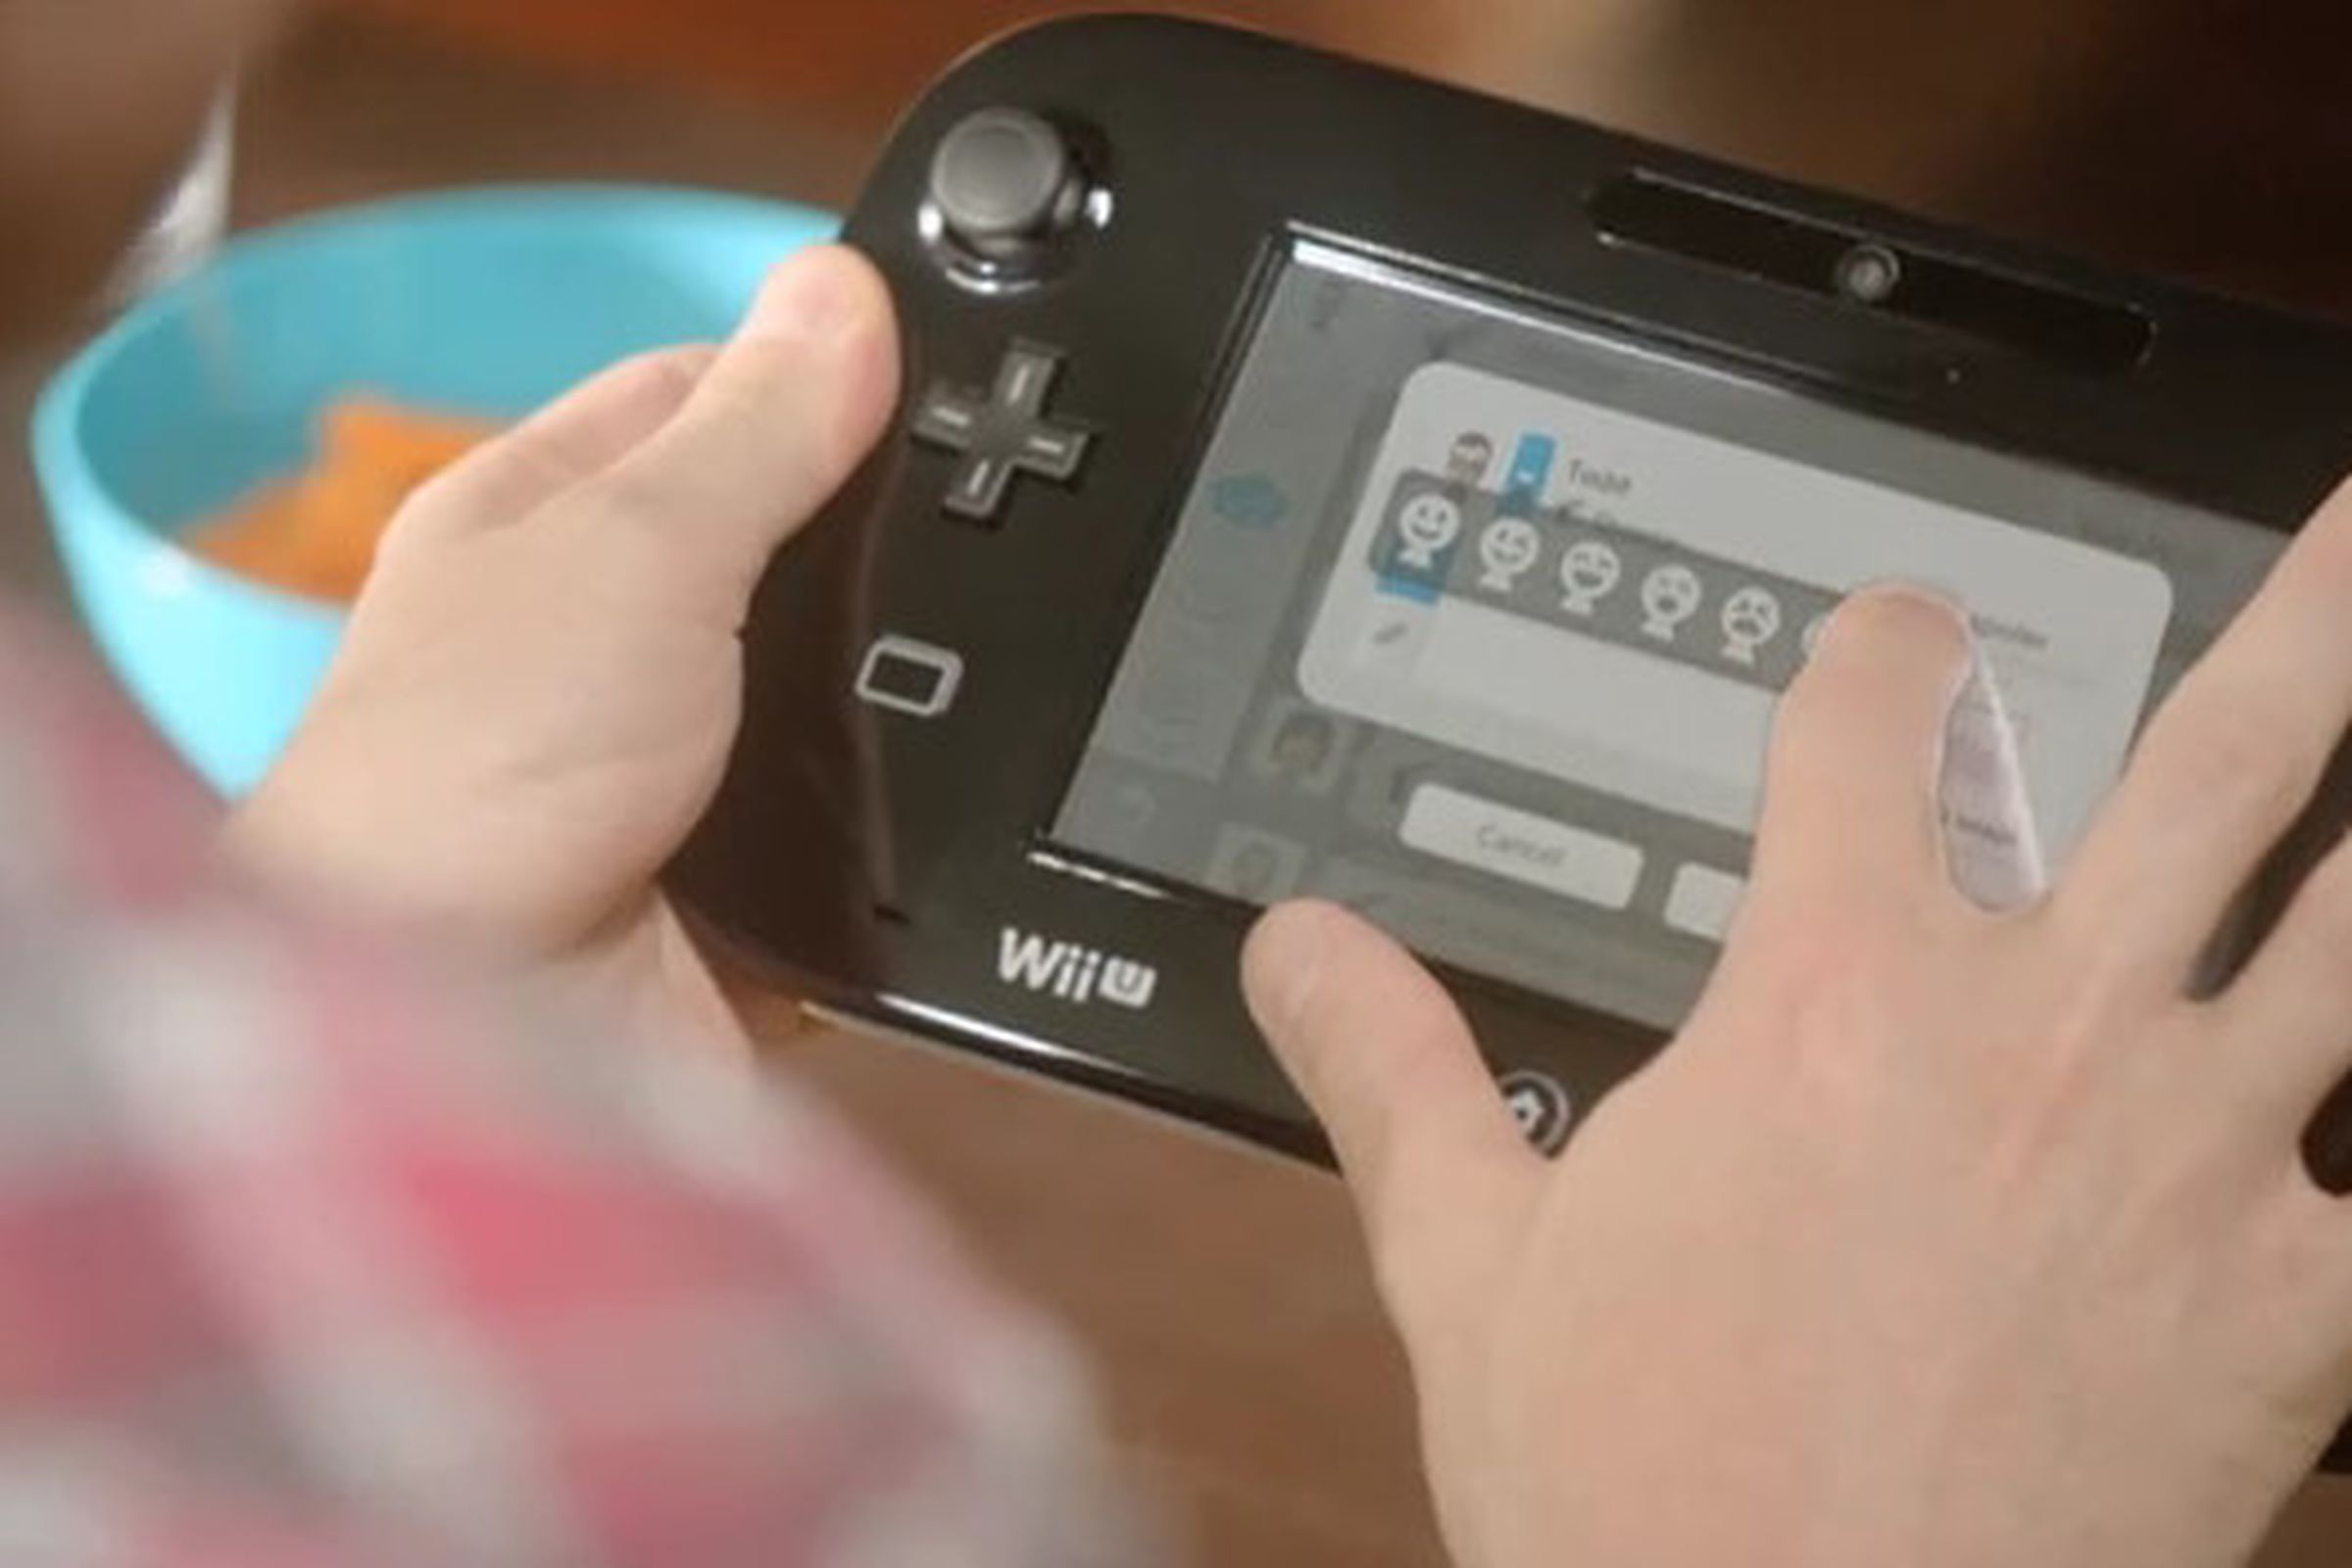 Gallery Photo: Wii U console officially revealed at Nintendo's pre-E3 press conference